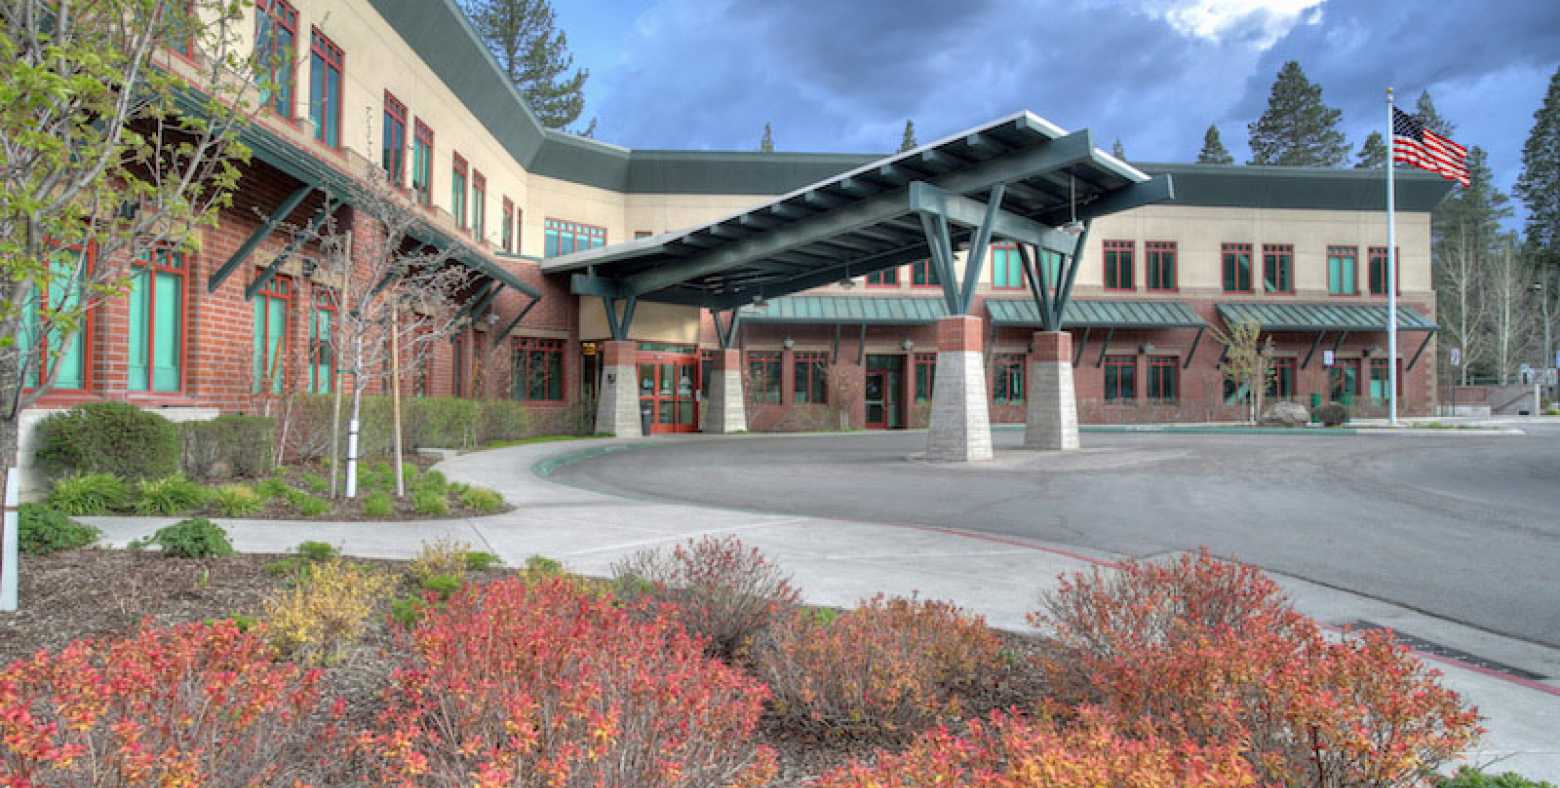 Tahoe Forest Hospital front exterior